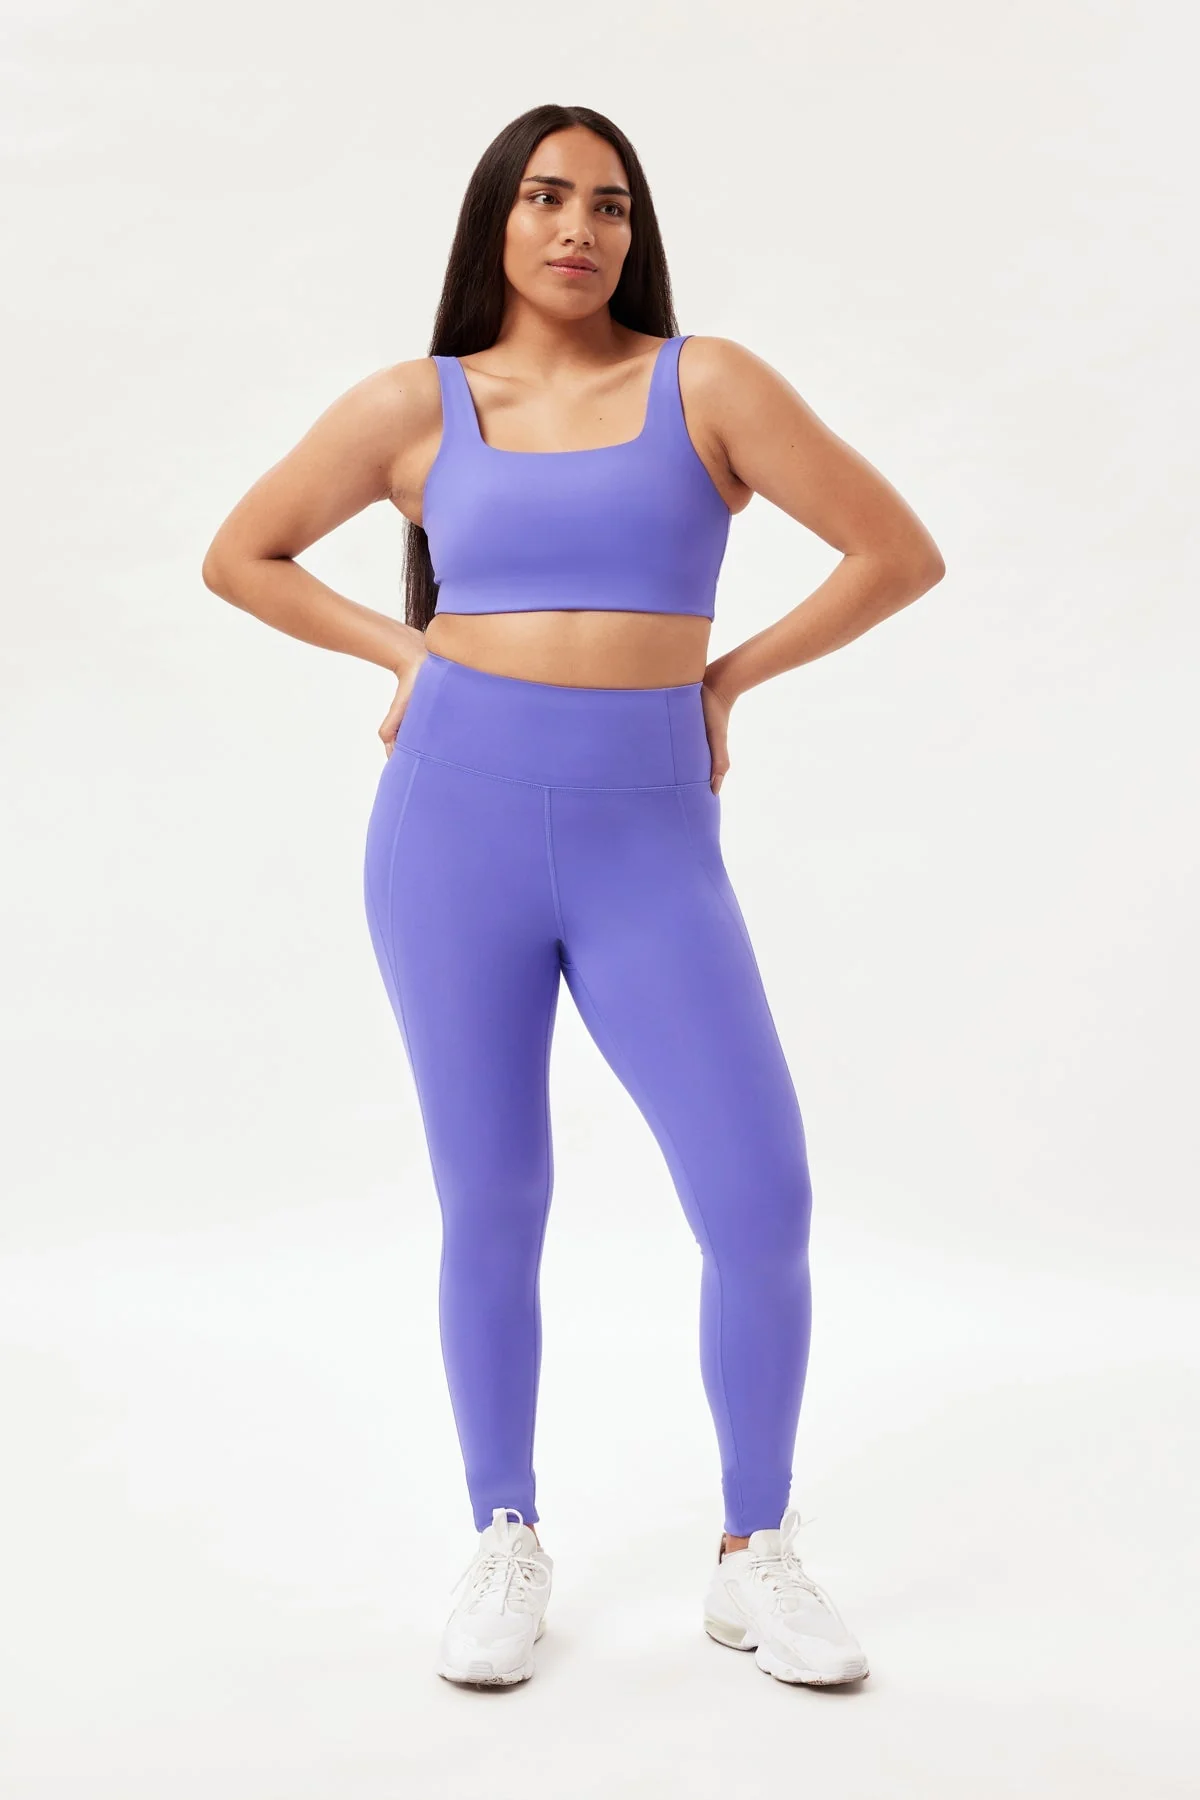 Girlfriend collective Review : ethically-made sustainable activewear